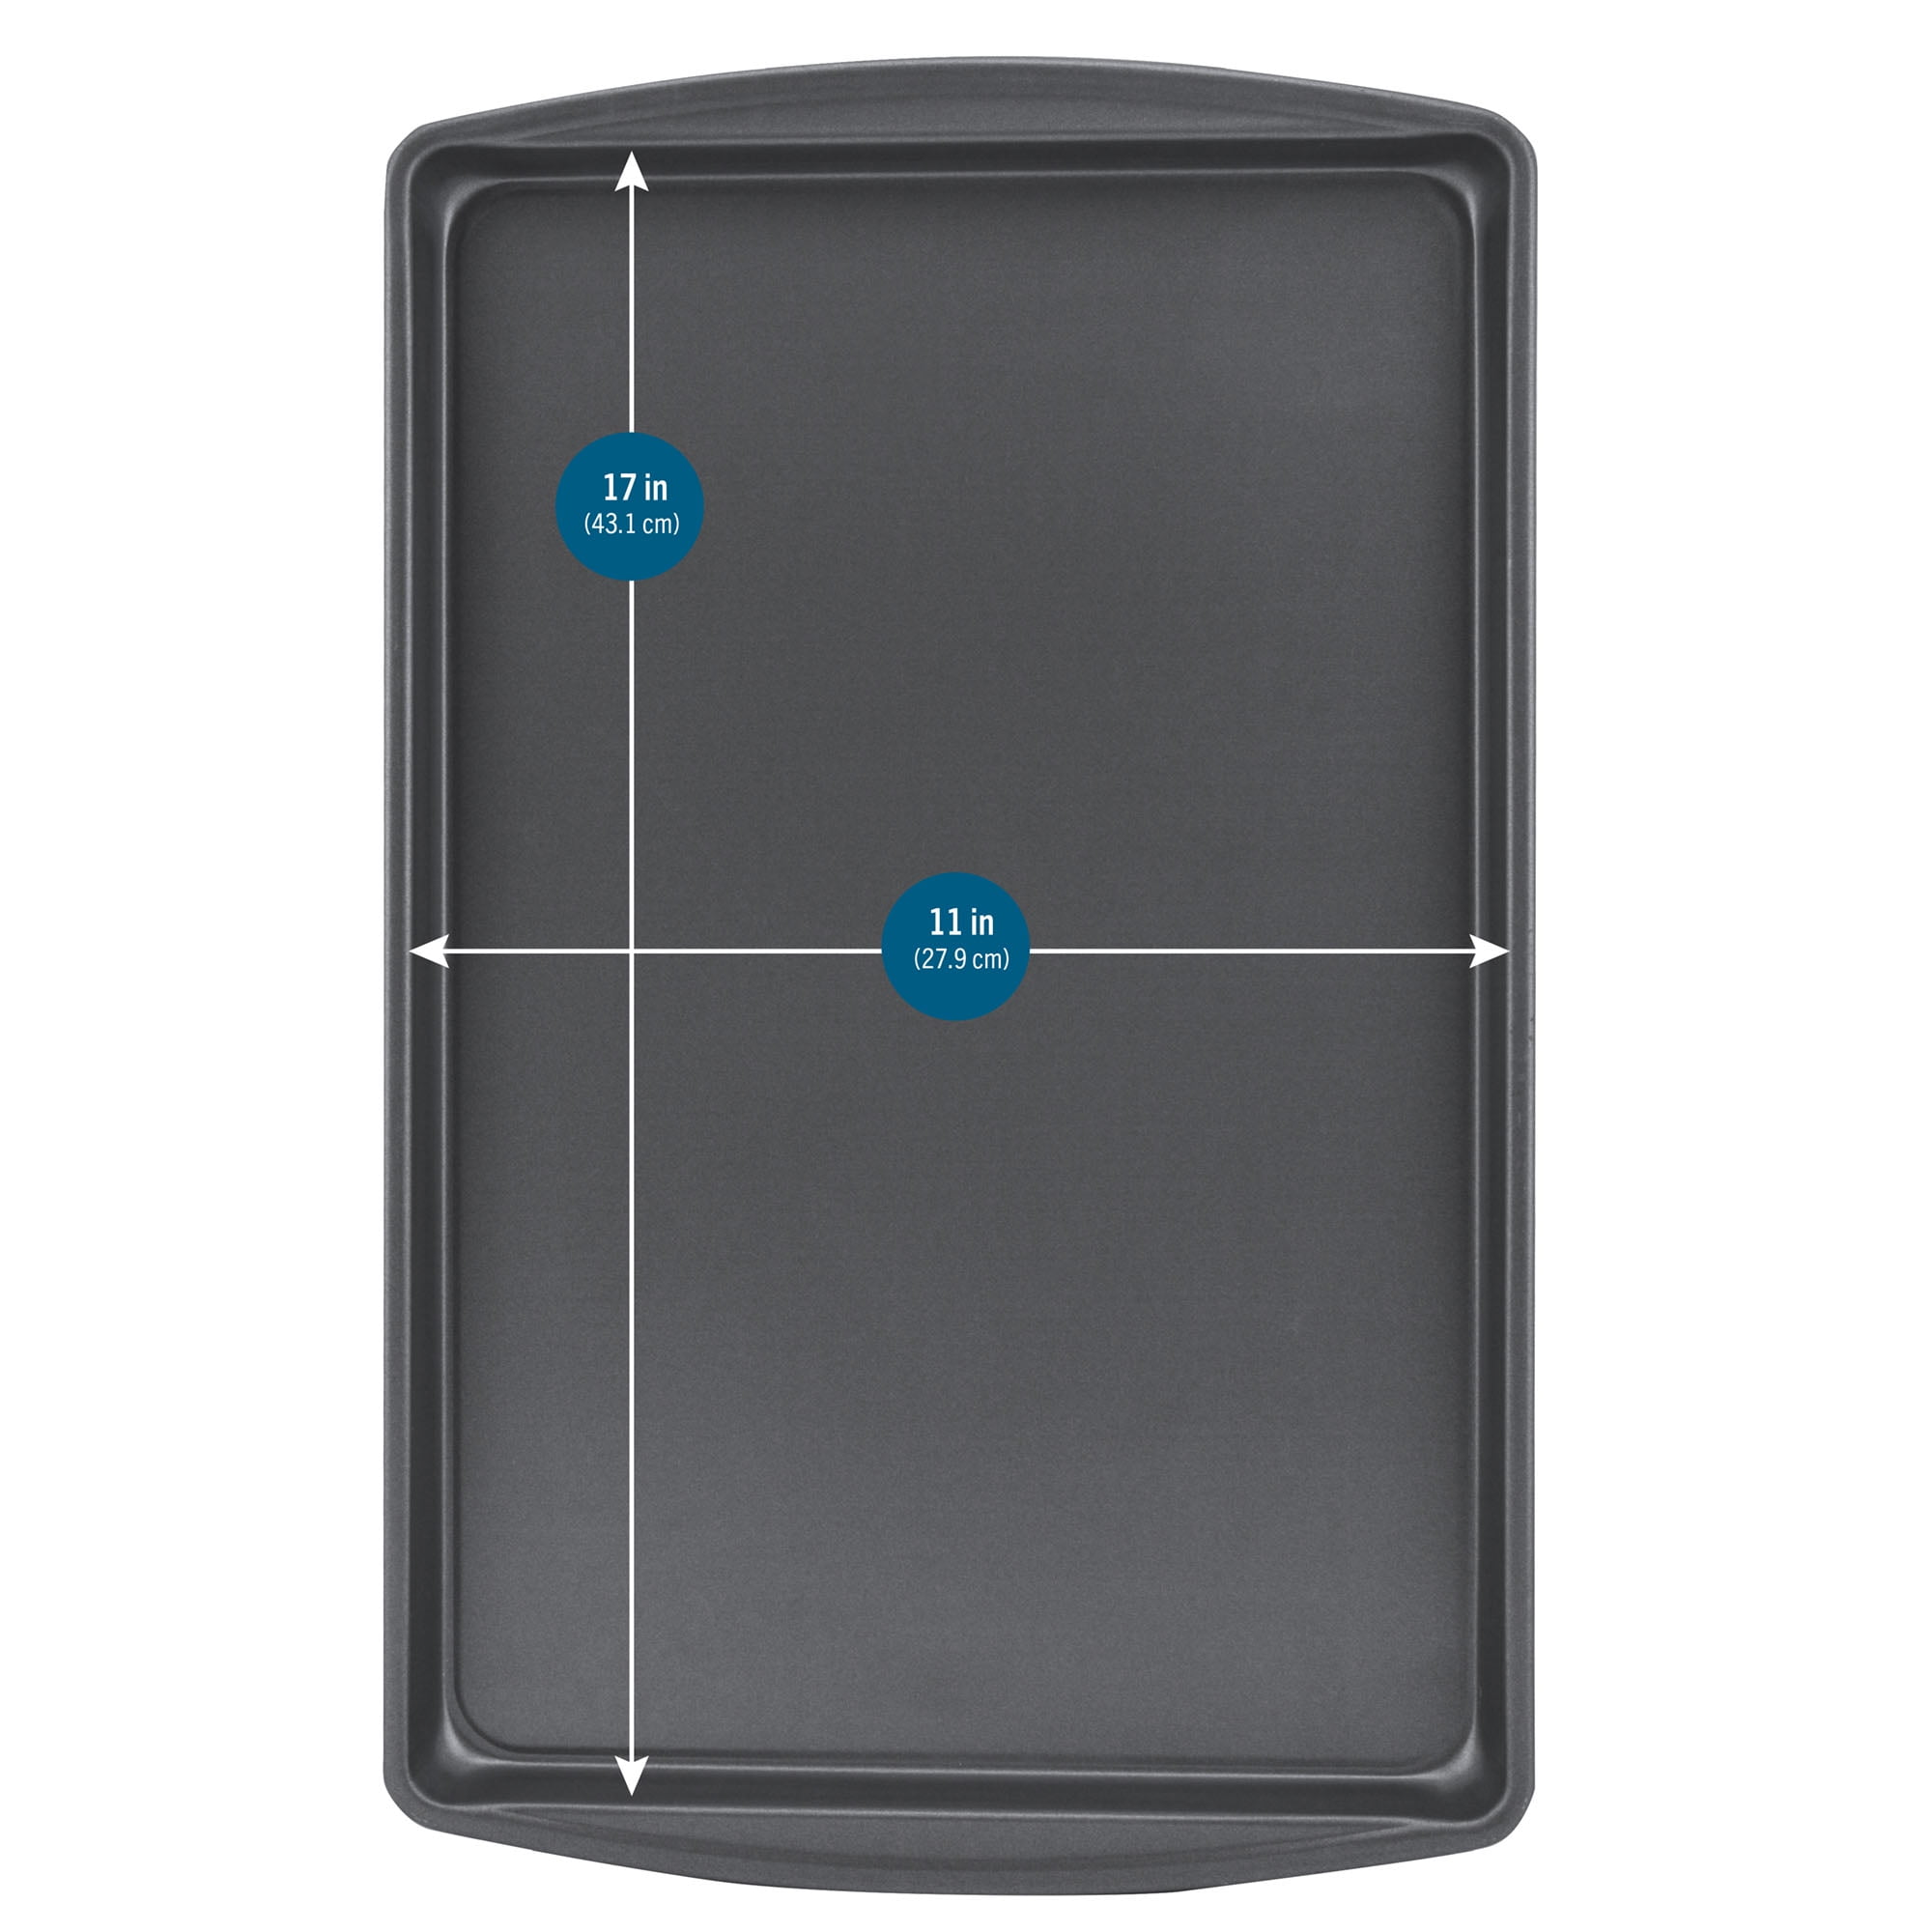 BakeIns 17¼” x 11⅛” Non-Stick Large Cookie Sheet